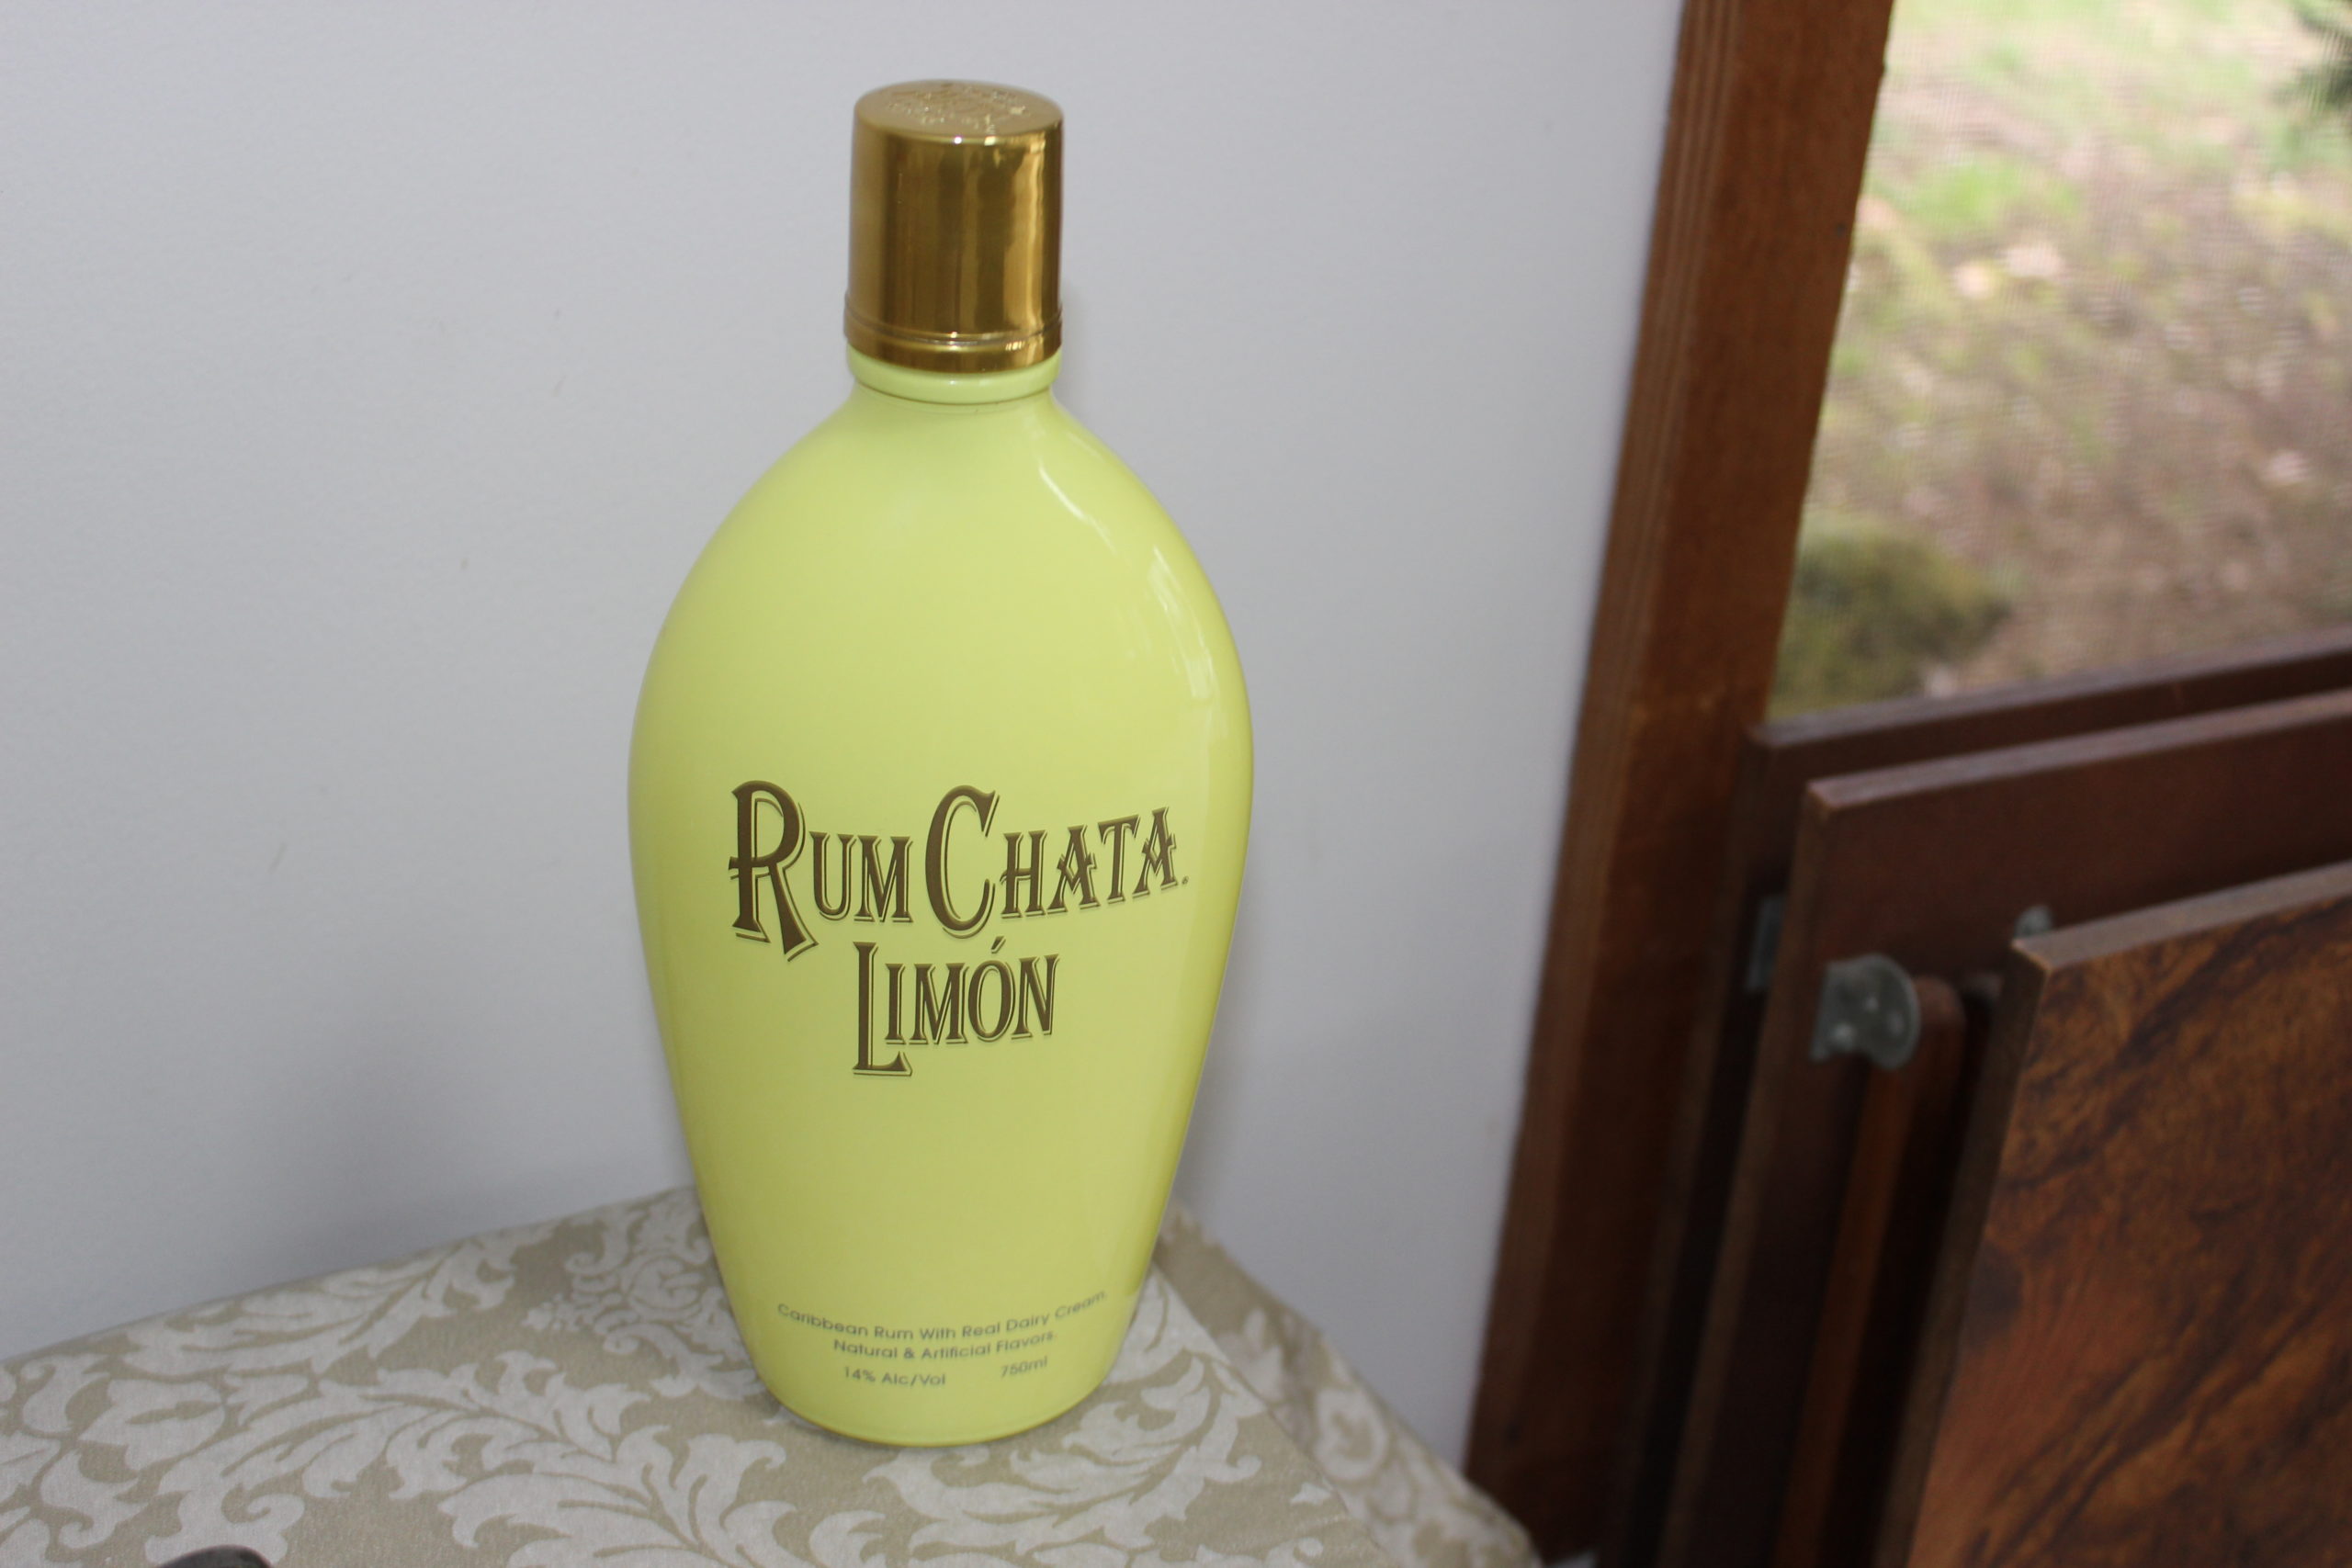 RumChata Limón Brings The Delicious Flavors of RumChata and Lemon